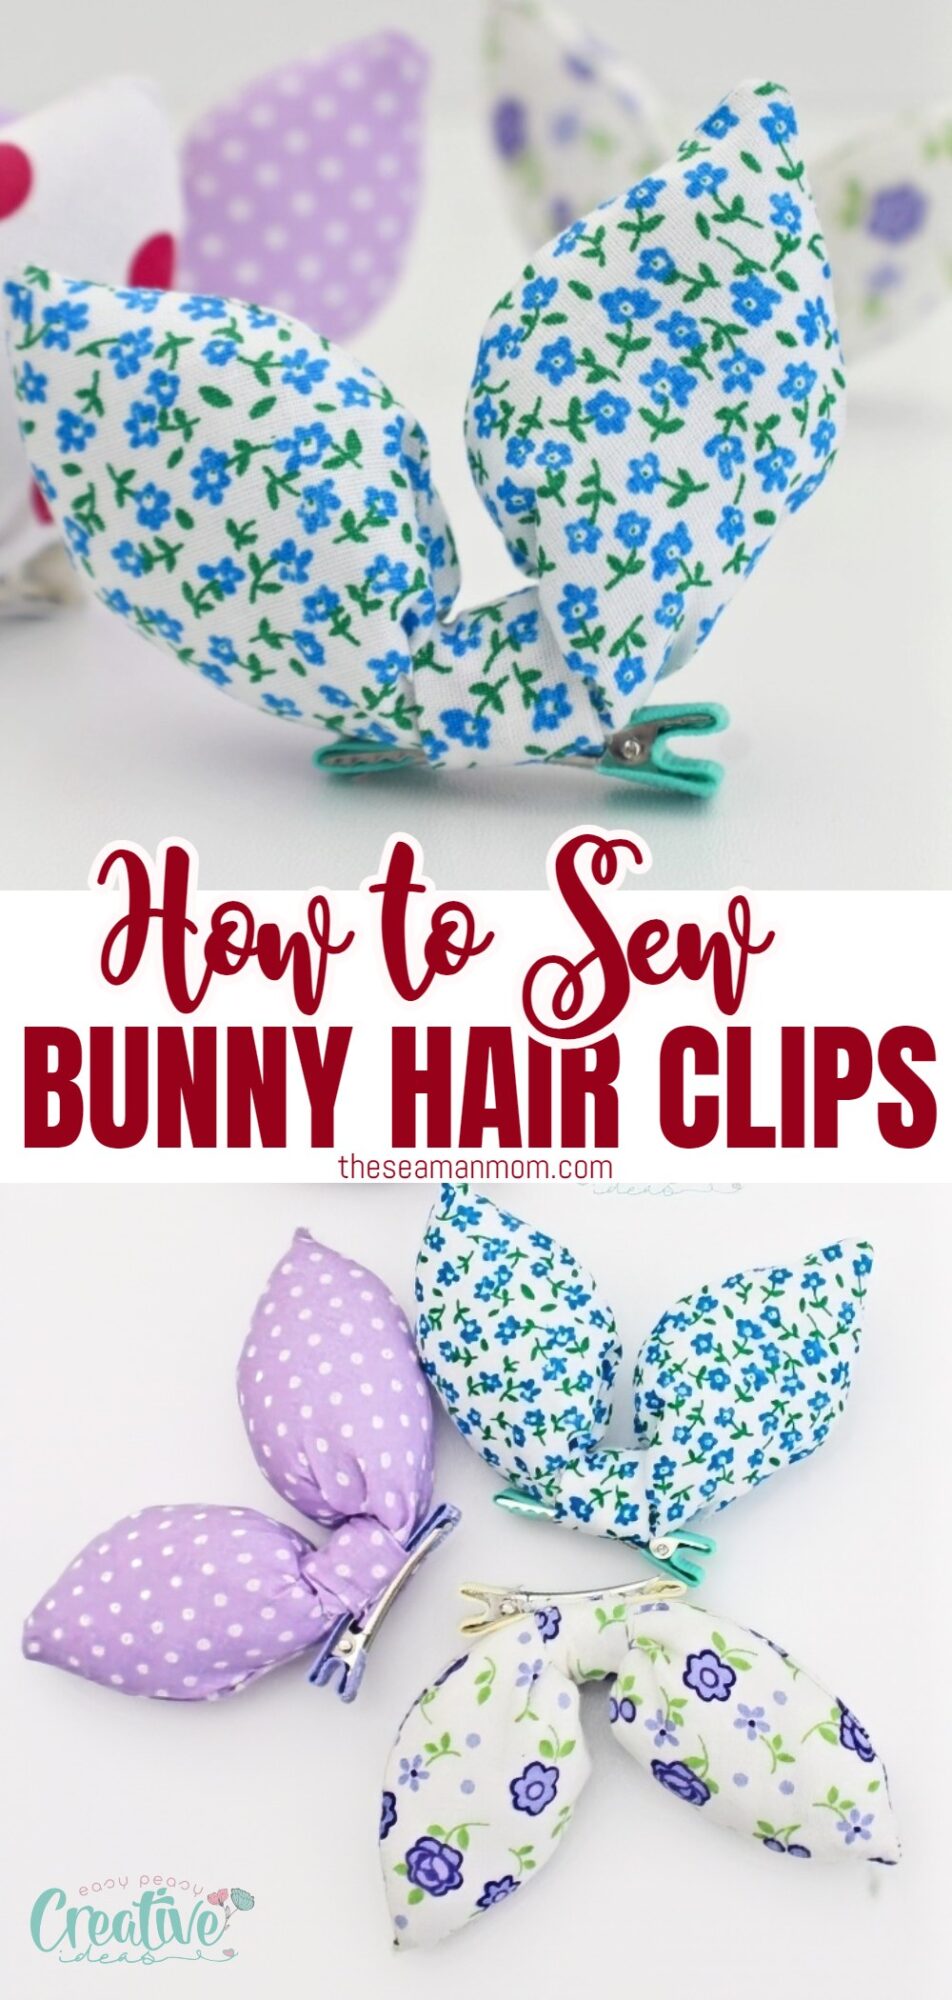 Step-by-step tutorial for sewing bunny hair clips, perfect for a festive ensemble.